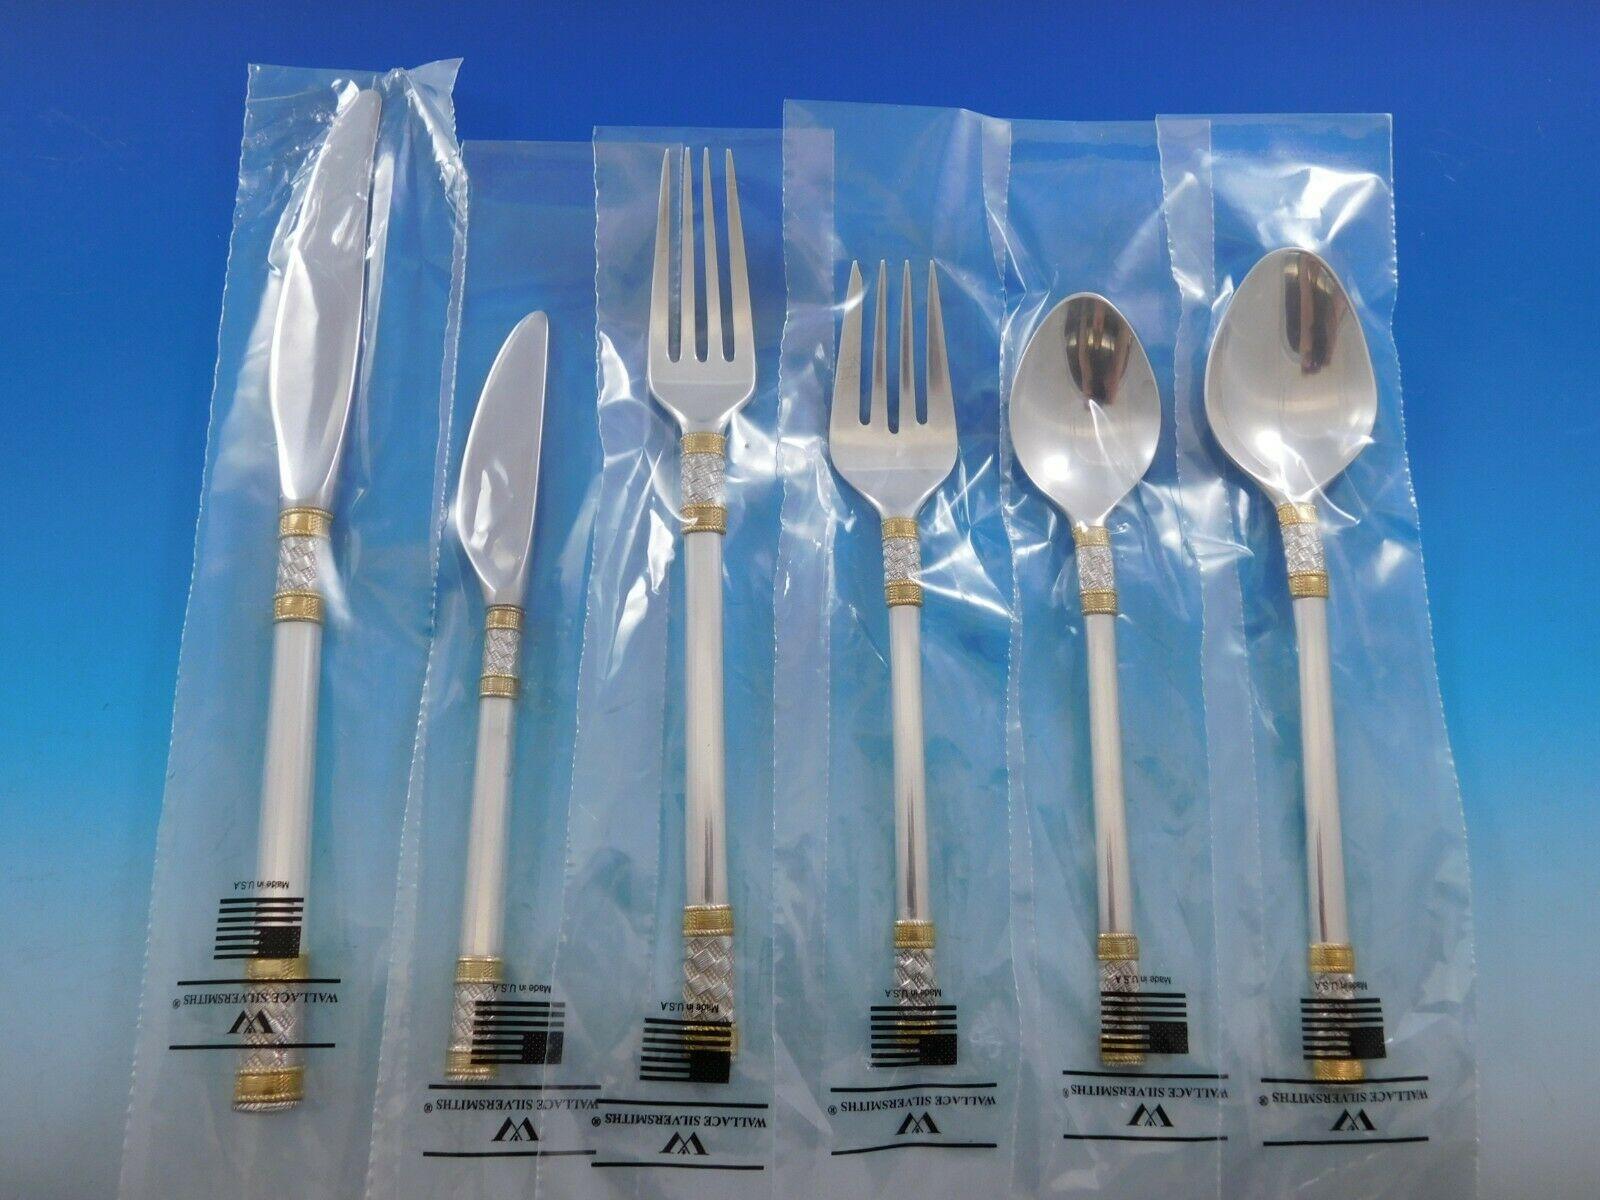 Unused Aegean weave gold accent by Wallace sterling silver flatware set, 76 pieces. This set includes:

12 knives, 9 3/8